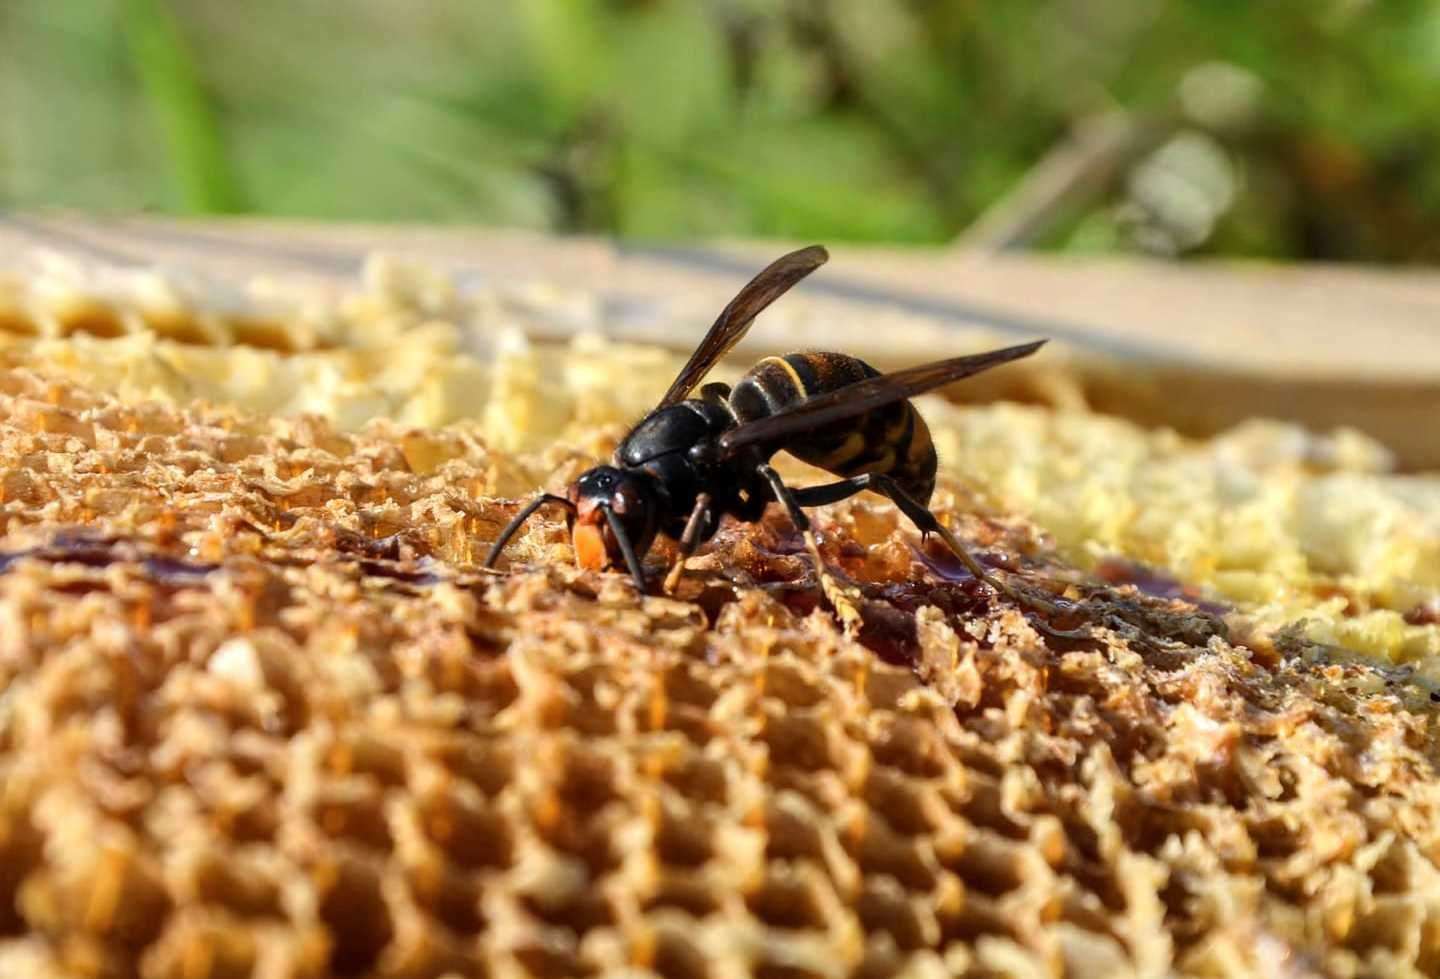 An Asian hornet was spotted in Ash between Canterbury and Dover